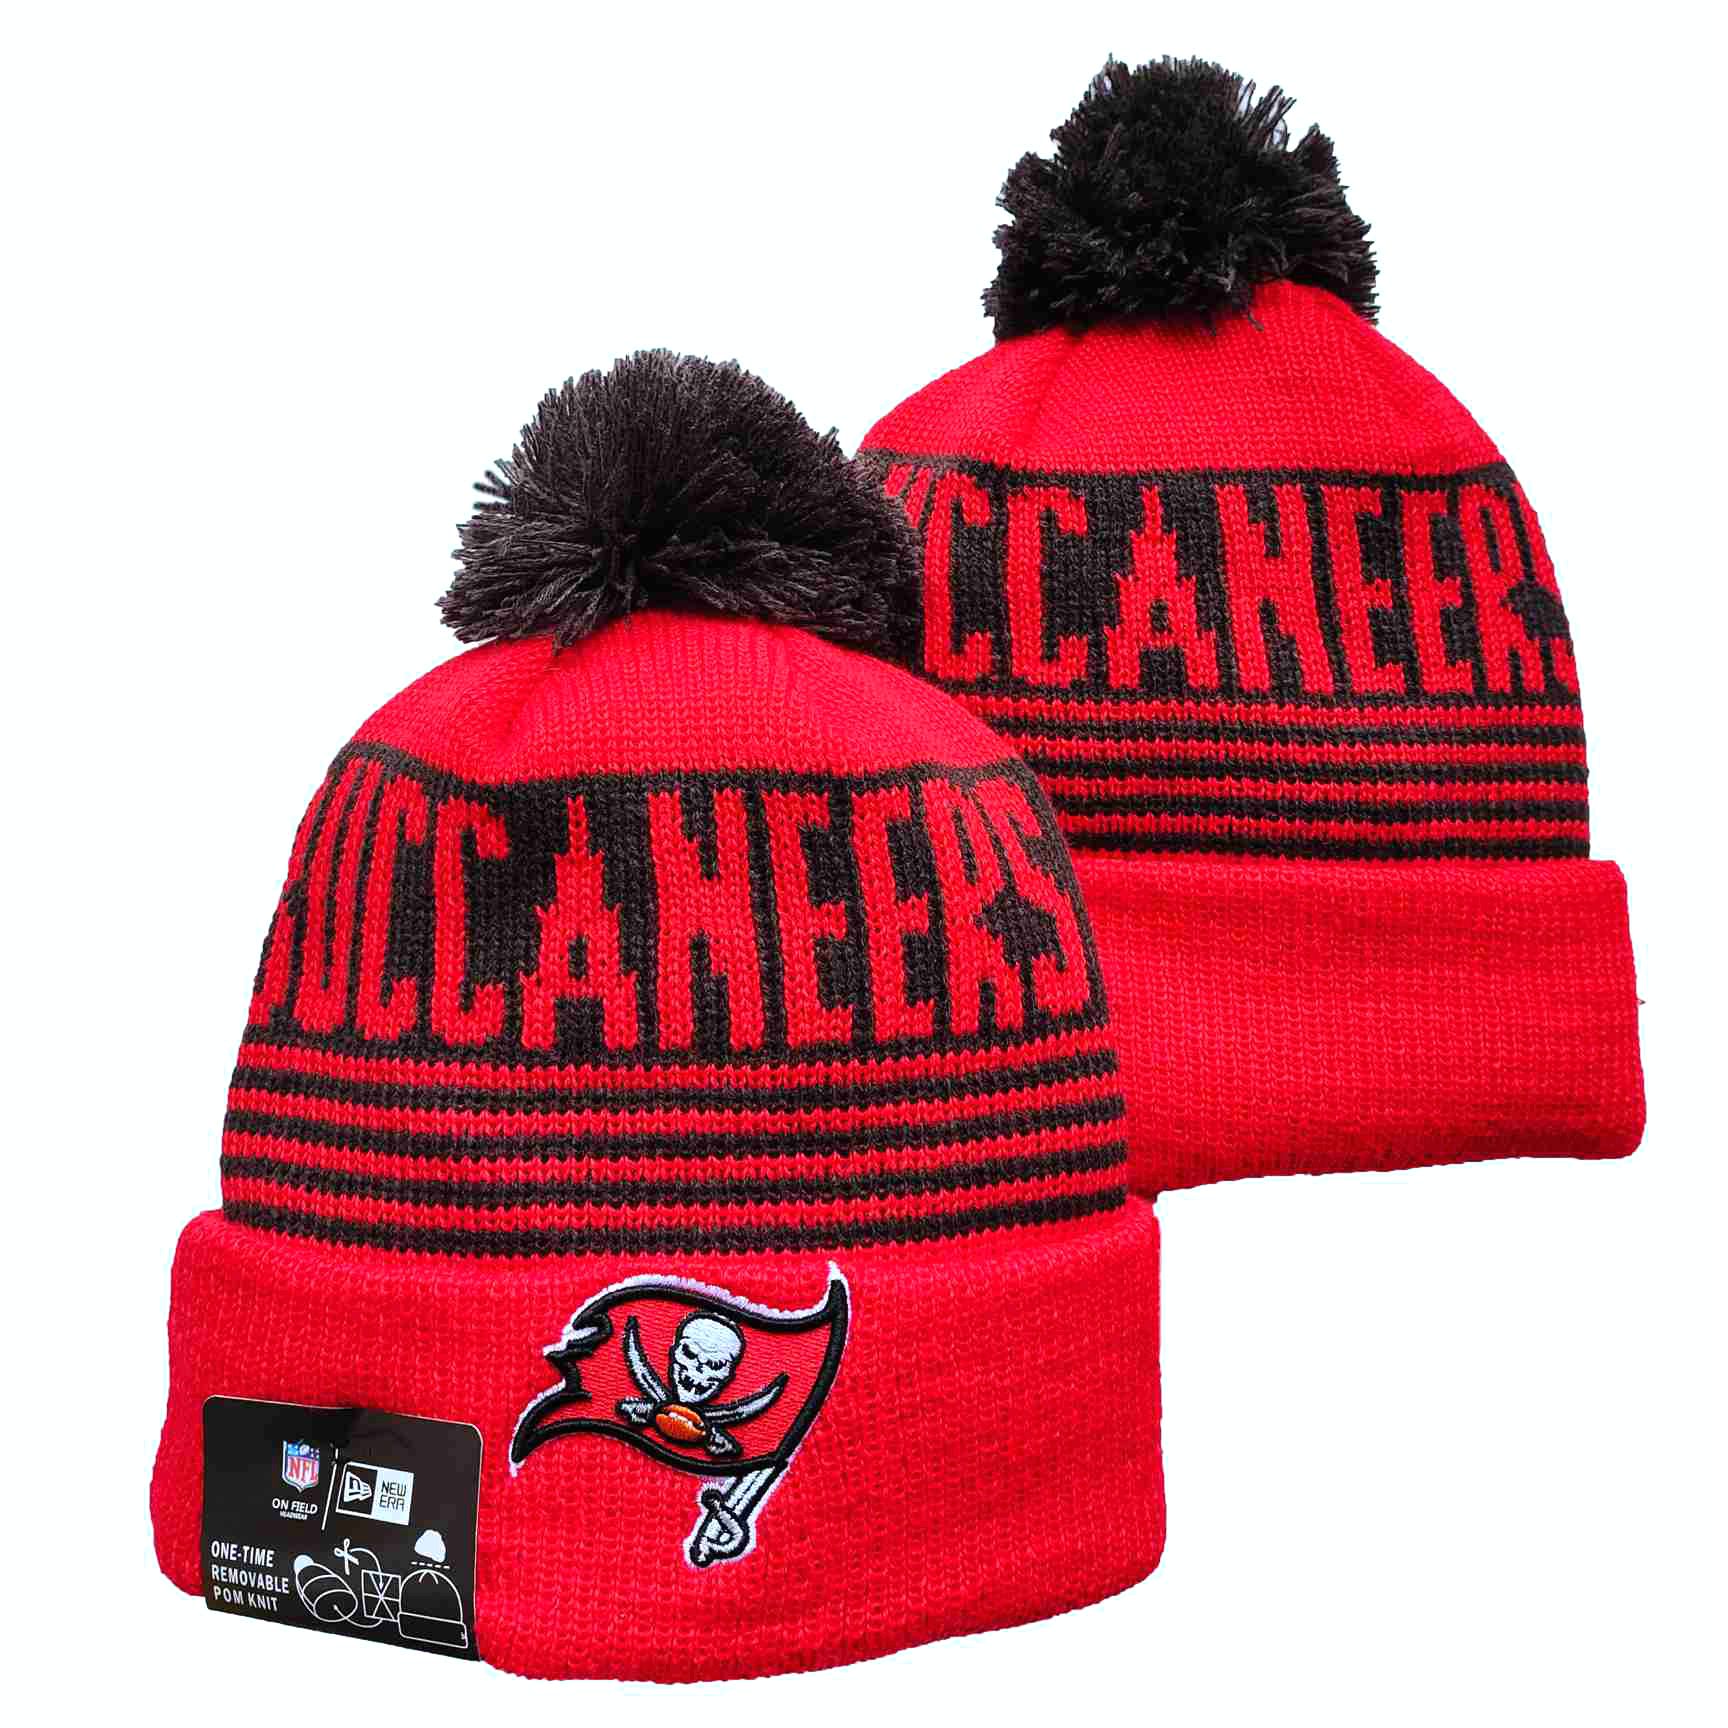 NFL Tampa Bay Buccaneers Beanies Knit Hats-YD1290